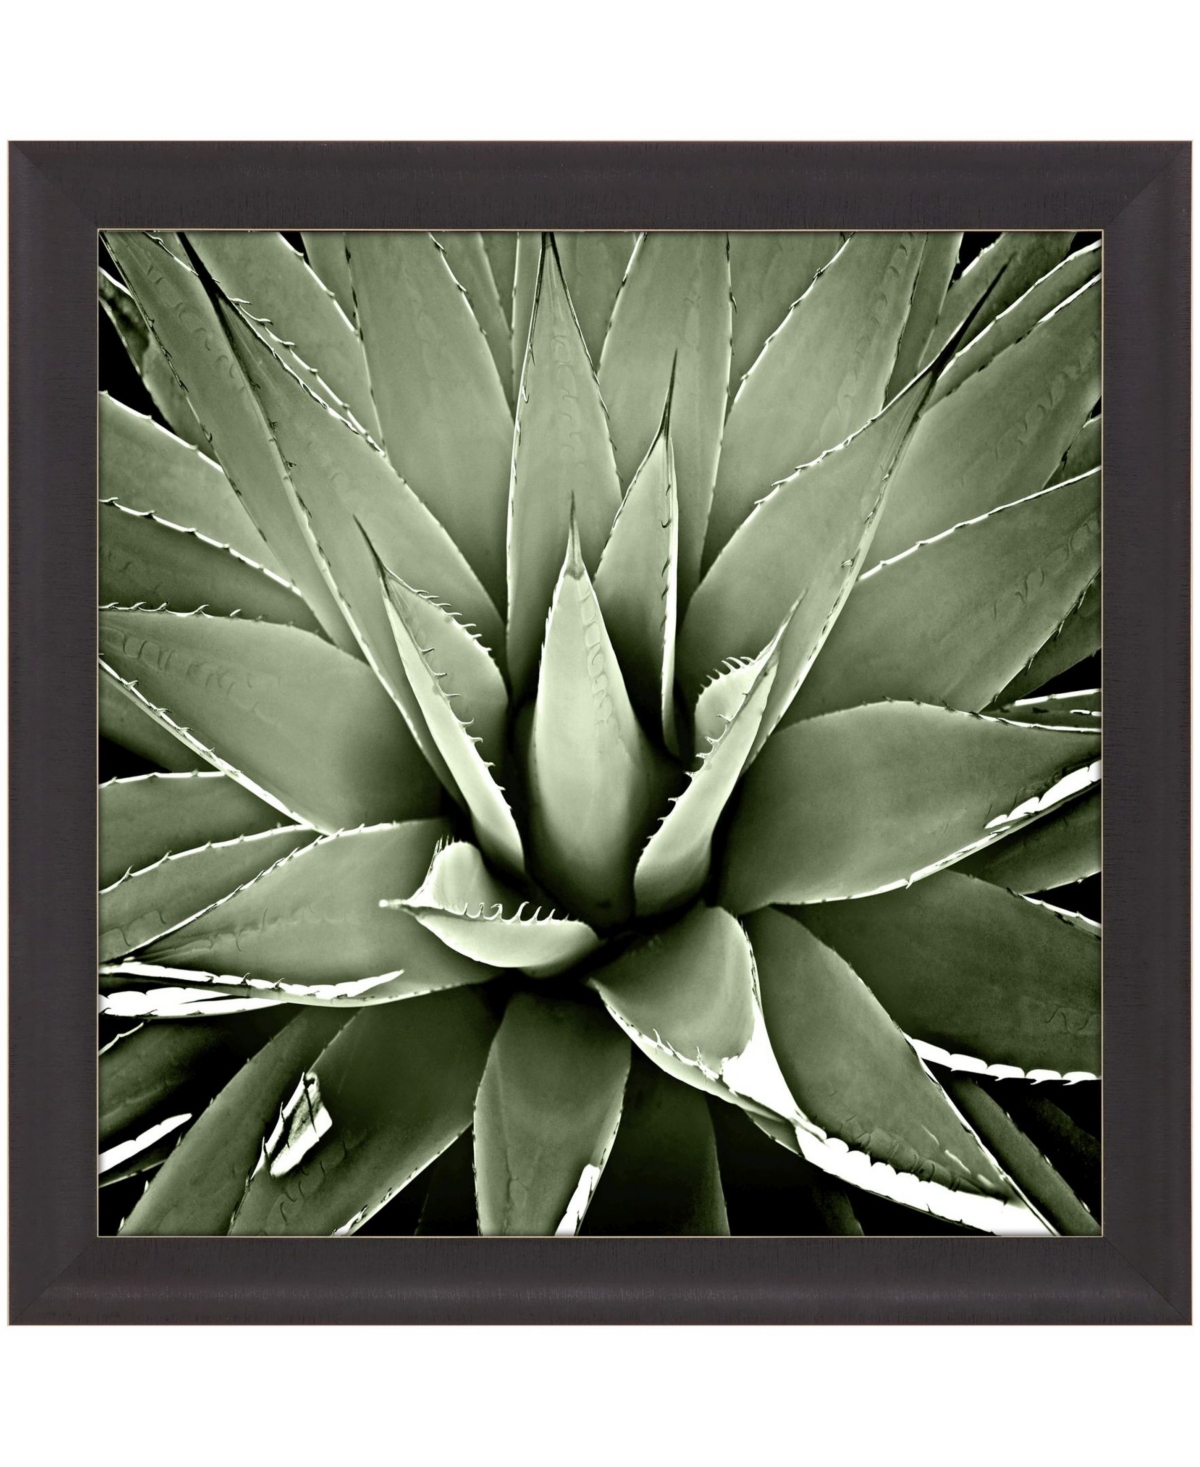 Paragon Picture Gallery Green Succulent Iii Framed Art